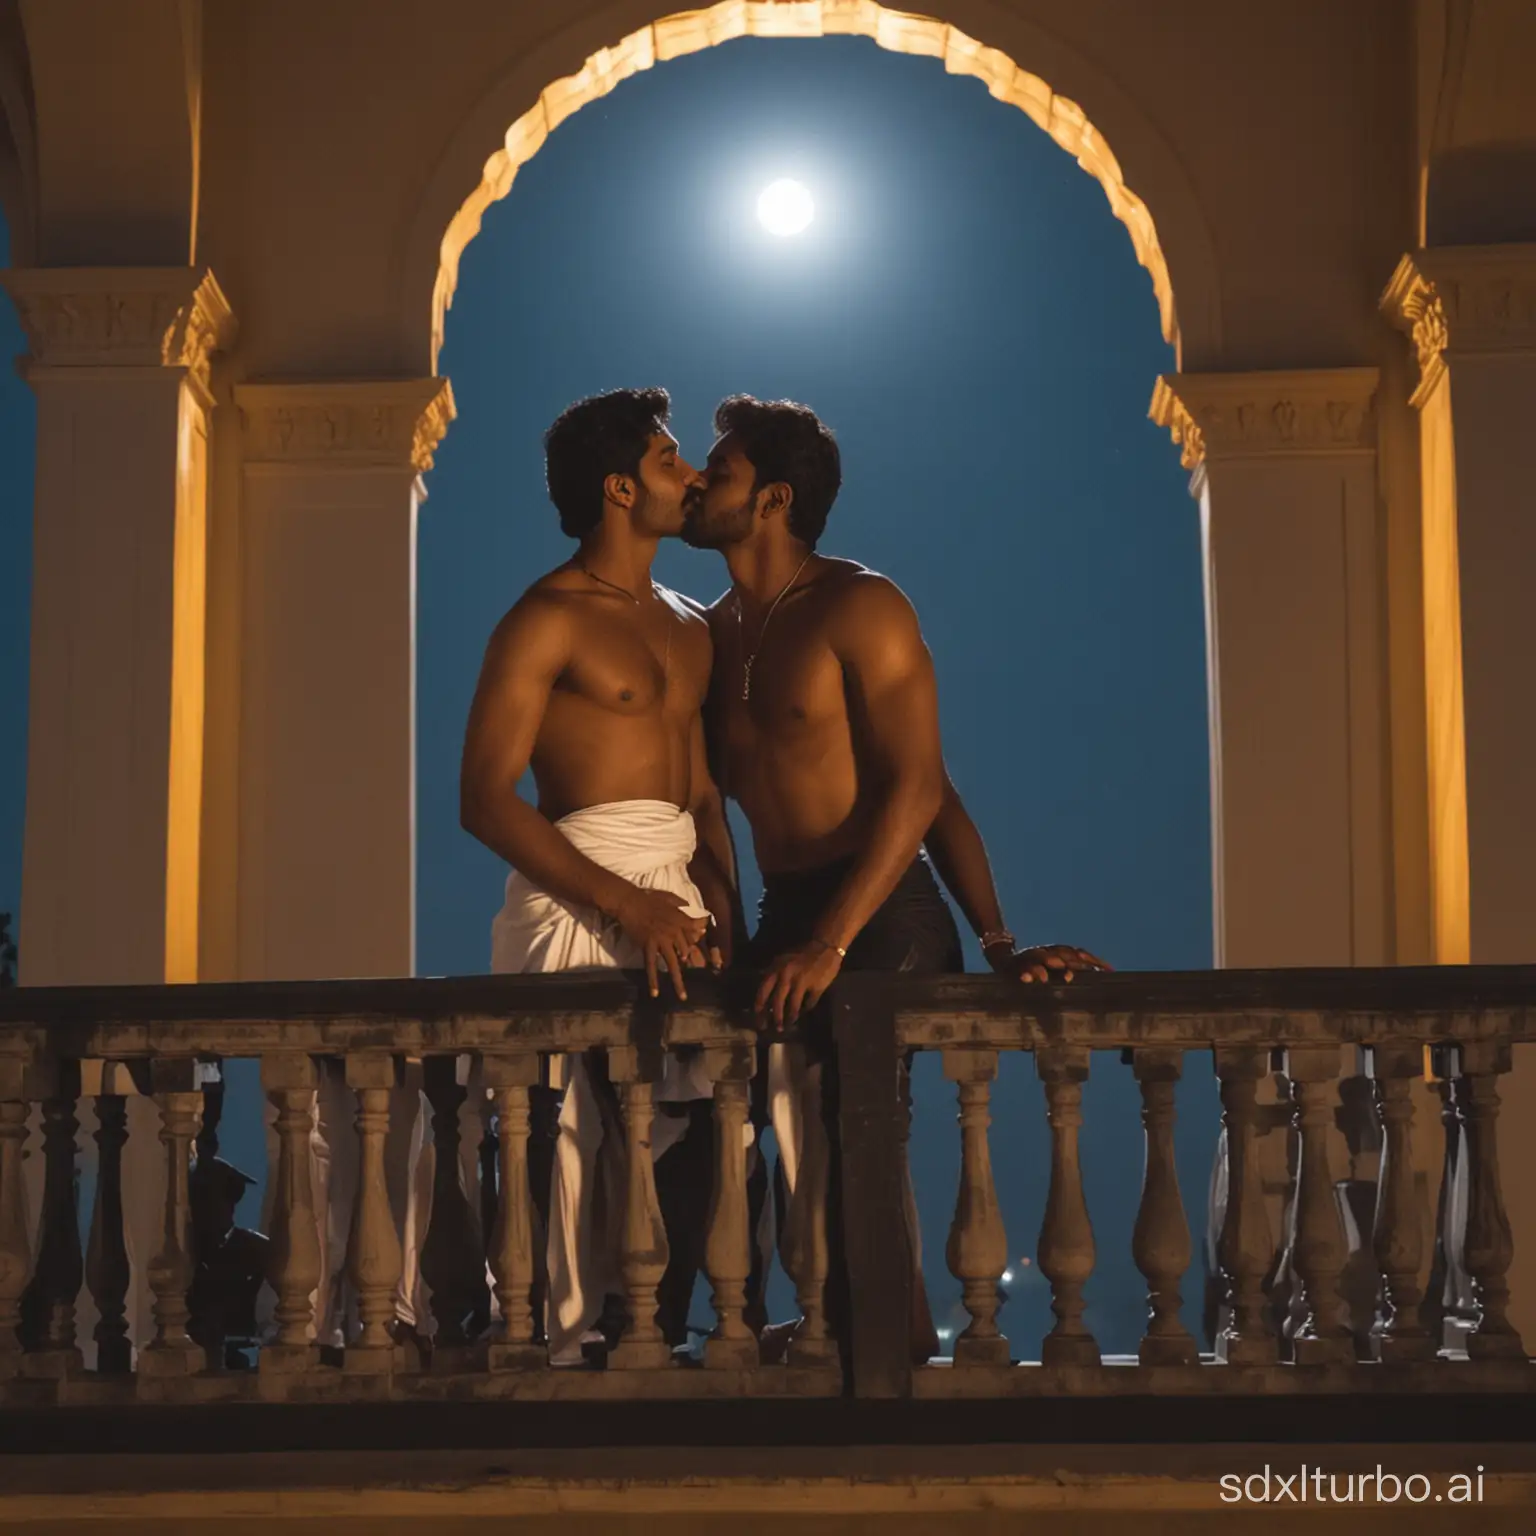 Two tamil guys kissing each other on their palace balcony, no dress, under moon light